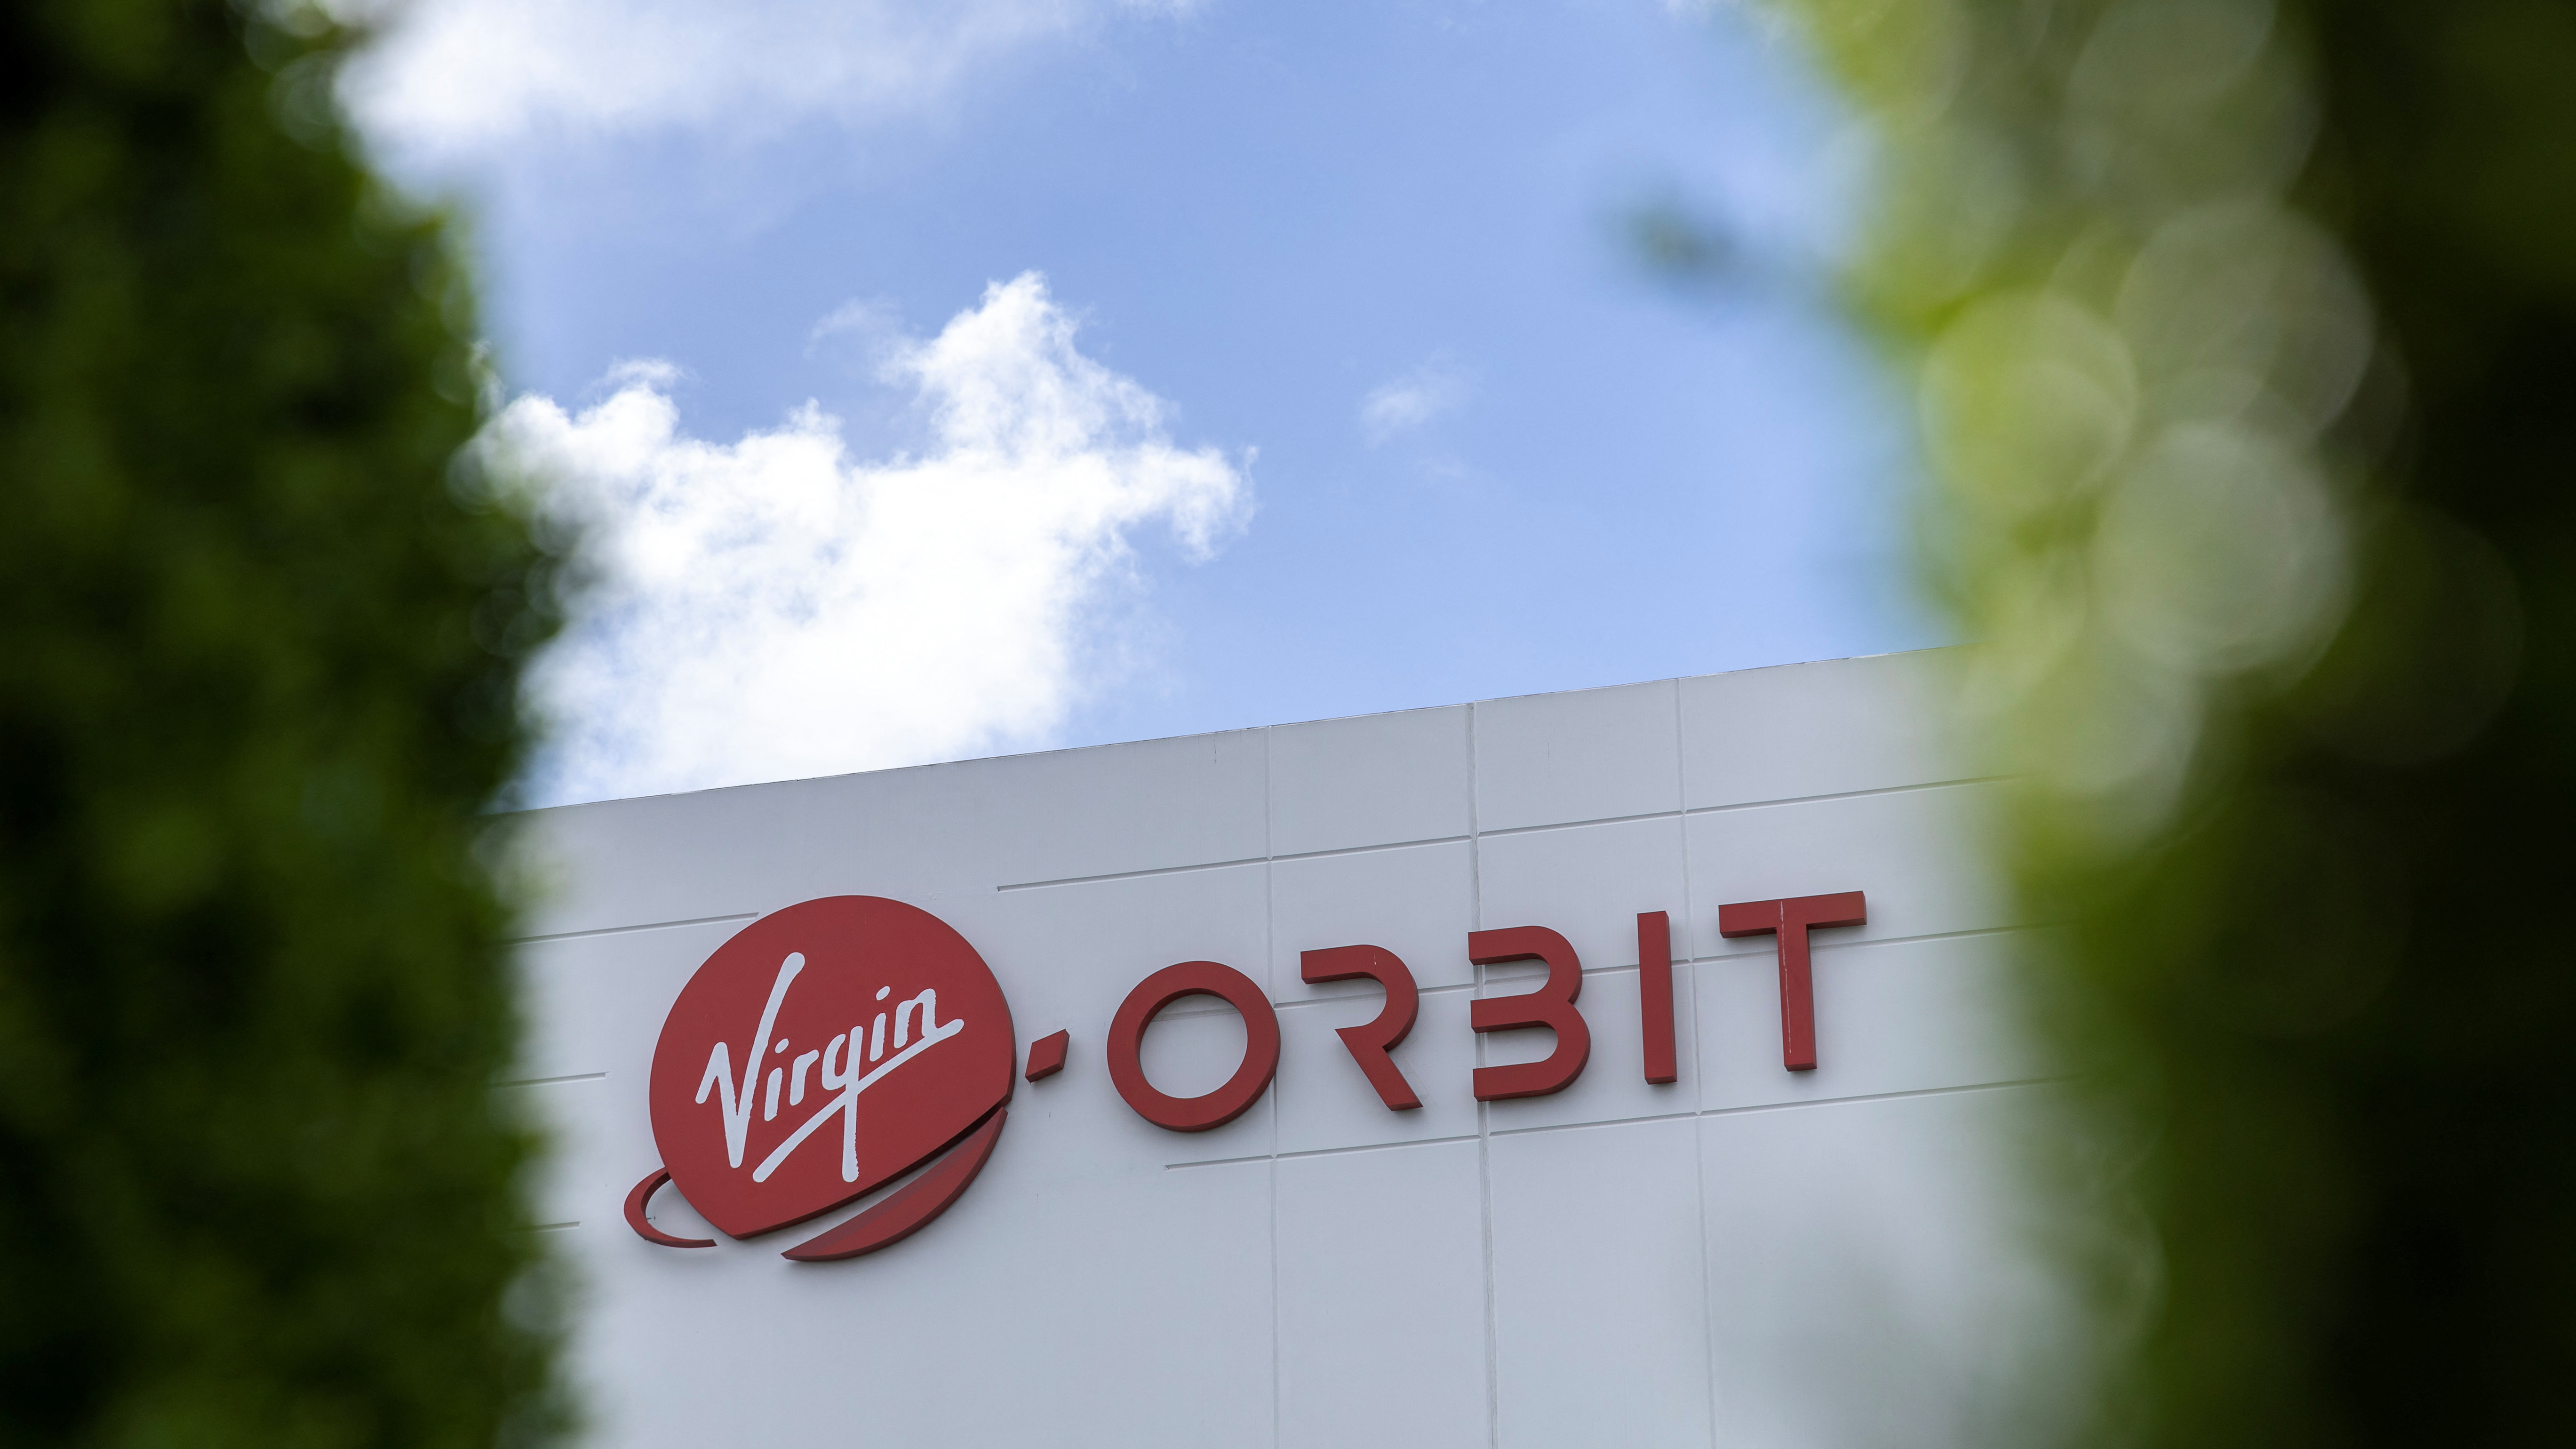 The news comes less than a week after Virgin Orbit announced the layoff of roughly 85% of its 750 employees. /Reuters/ Mike Blake/File Photo